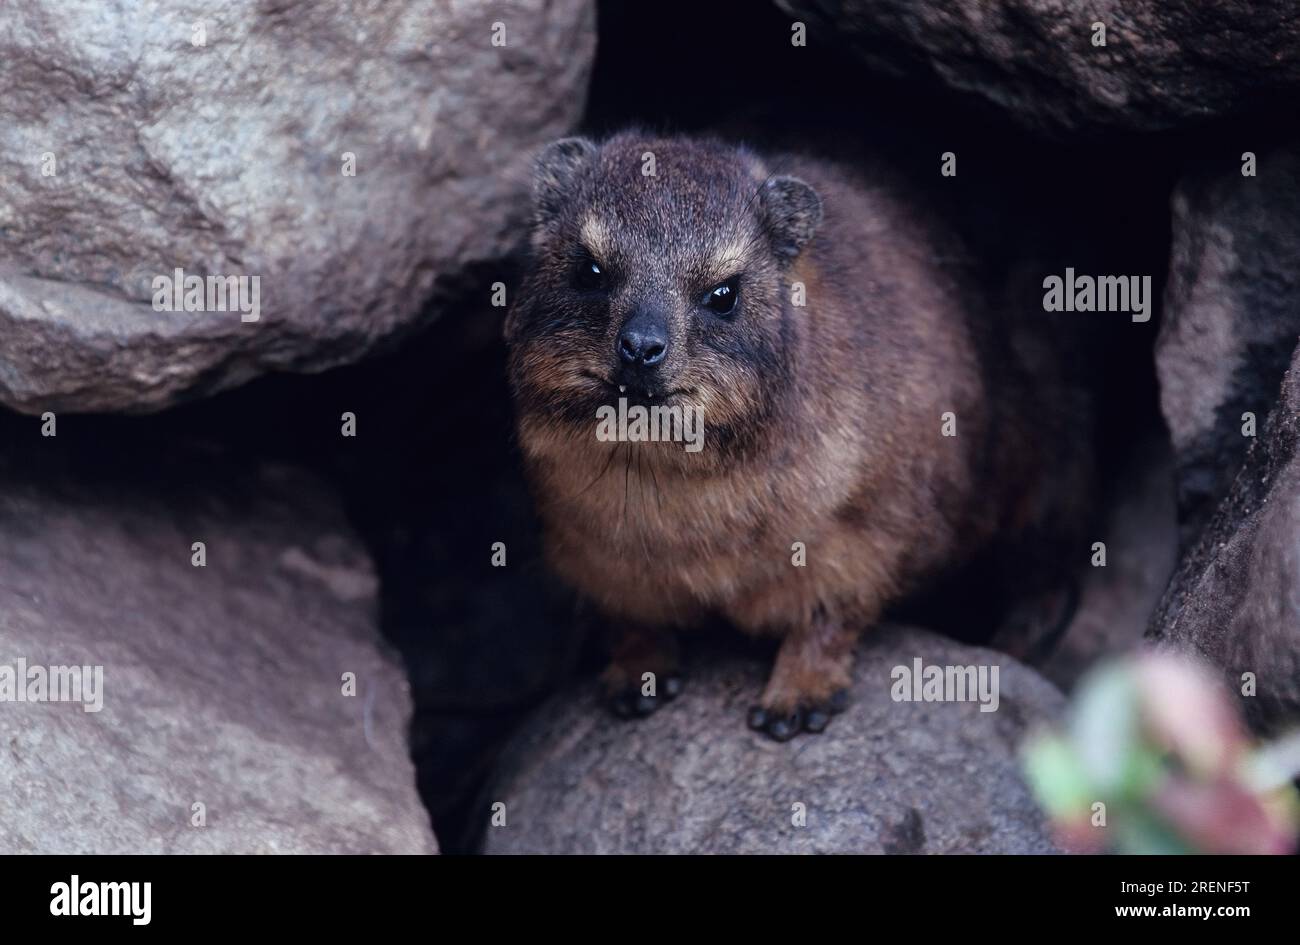 The yellow-spotted rock hyrax or bush hyrax (Heterohyrax brucei) is a species of mammal in the family Procaviidae. Stock Photo